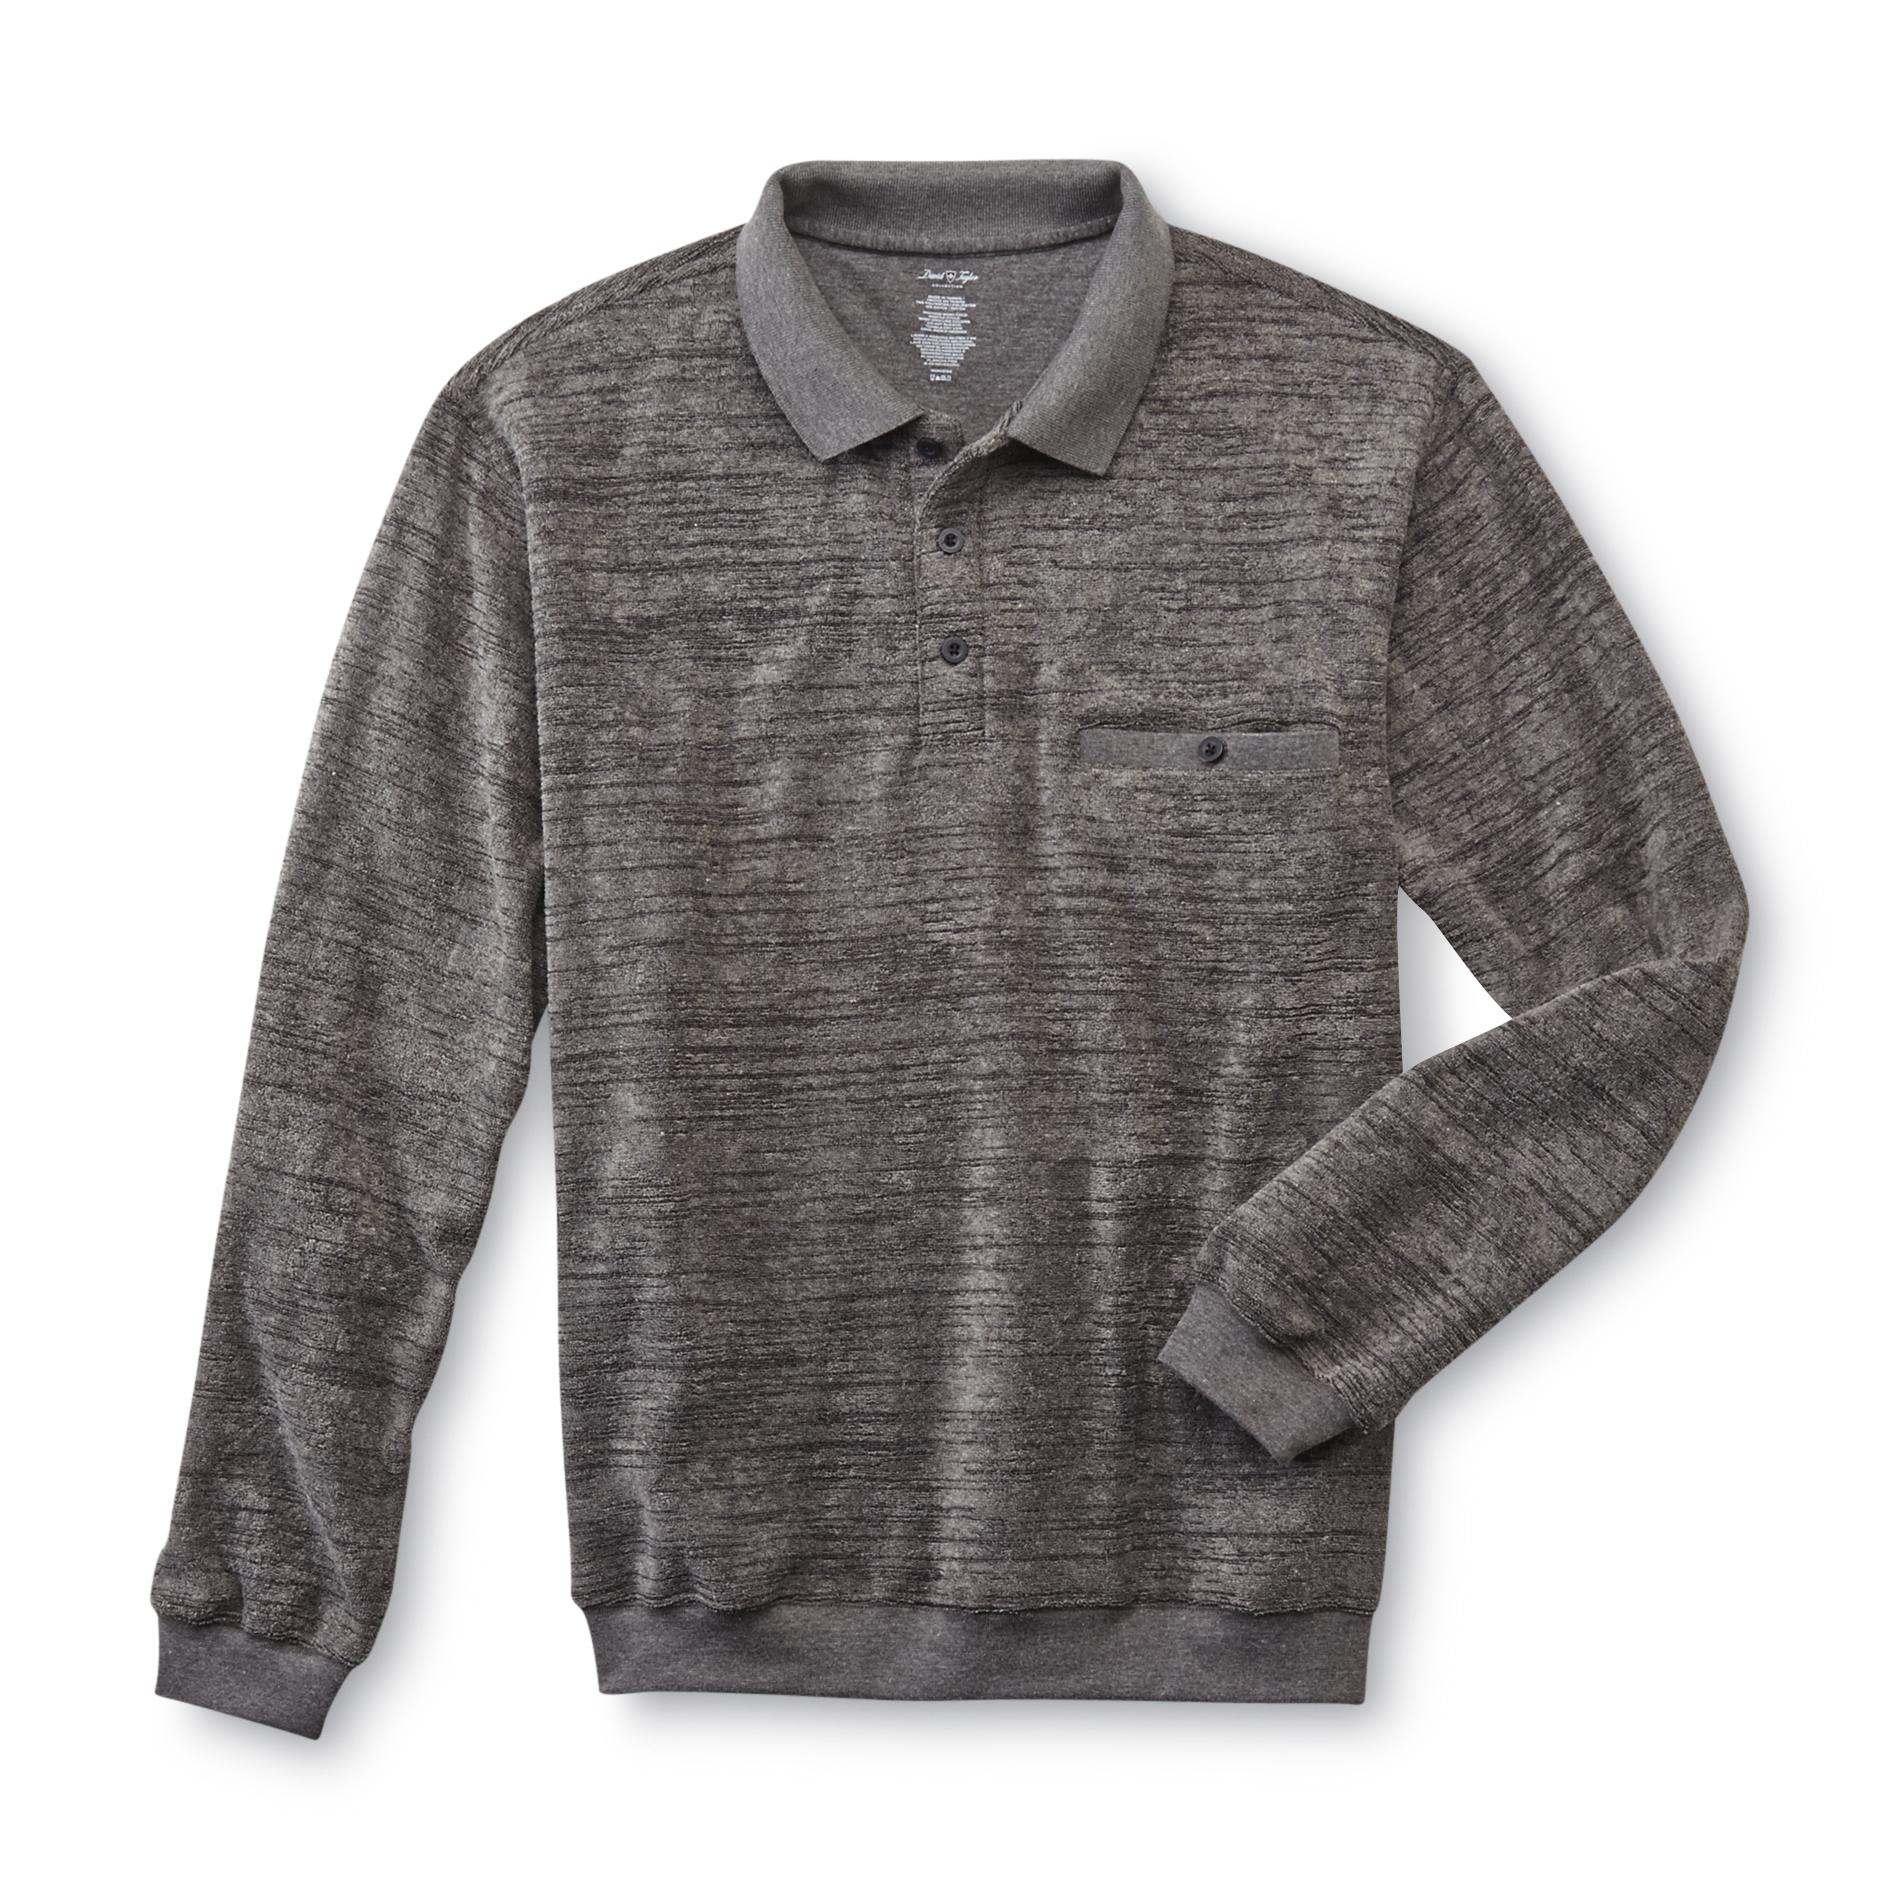 David Taylor Collection Men's Boucle Long-Sleeve Polo Shirt - Space-Dyed